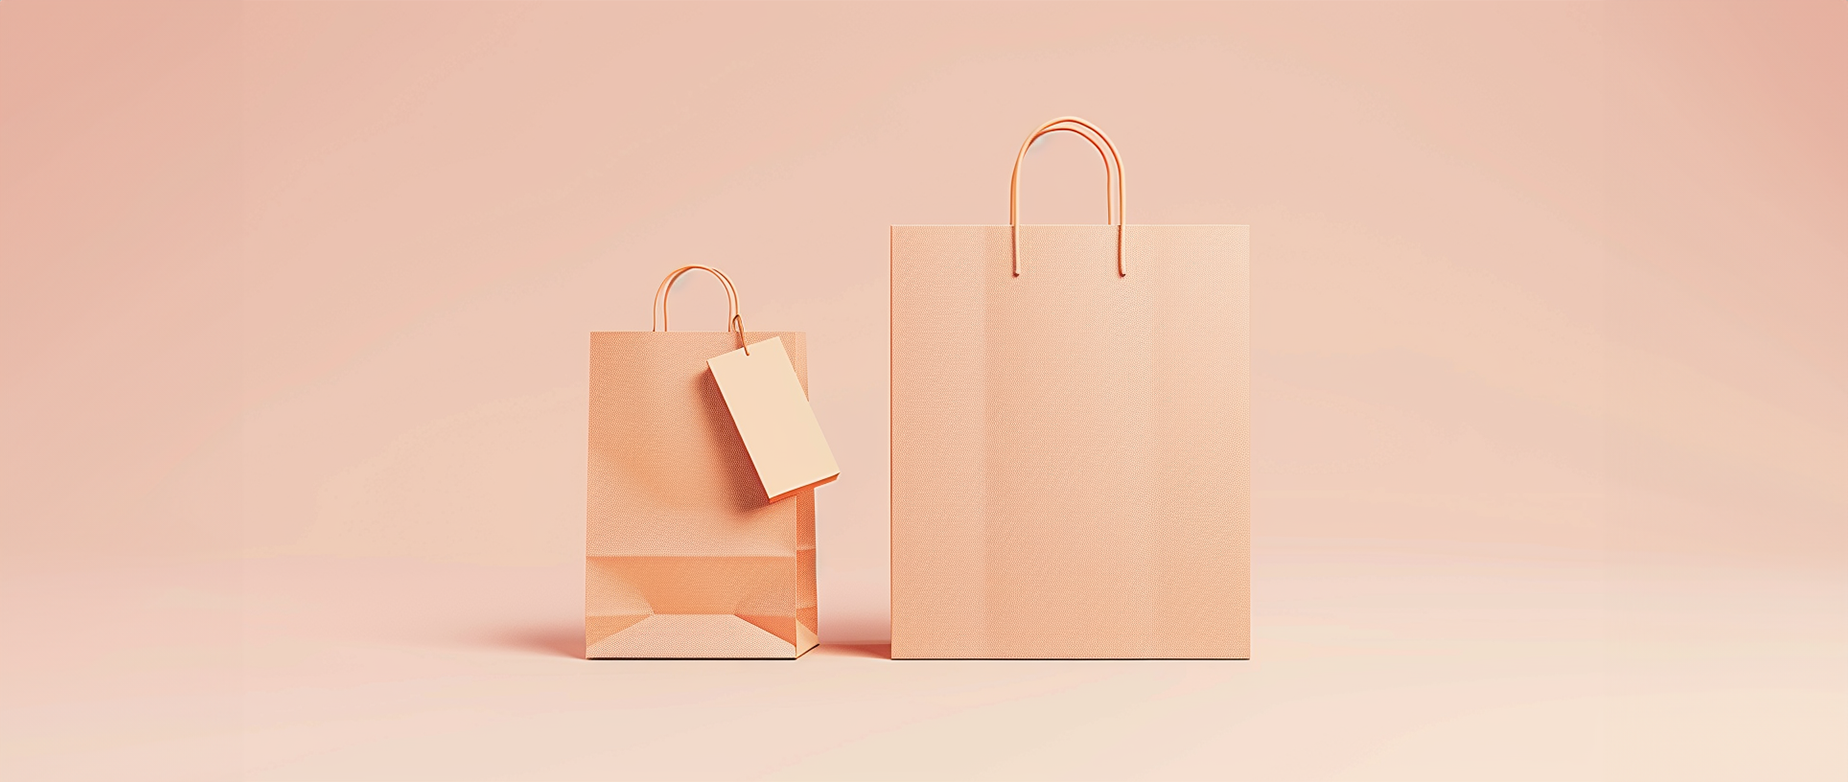 Two shopping bags on a peach colored background.